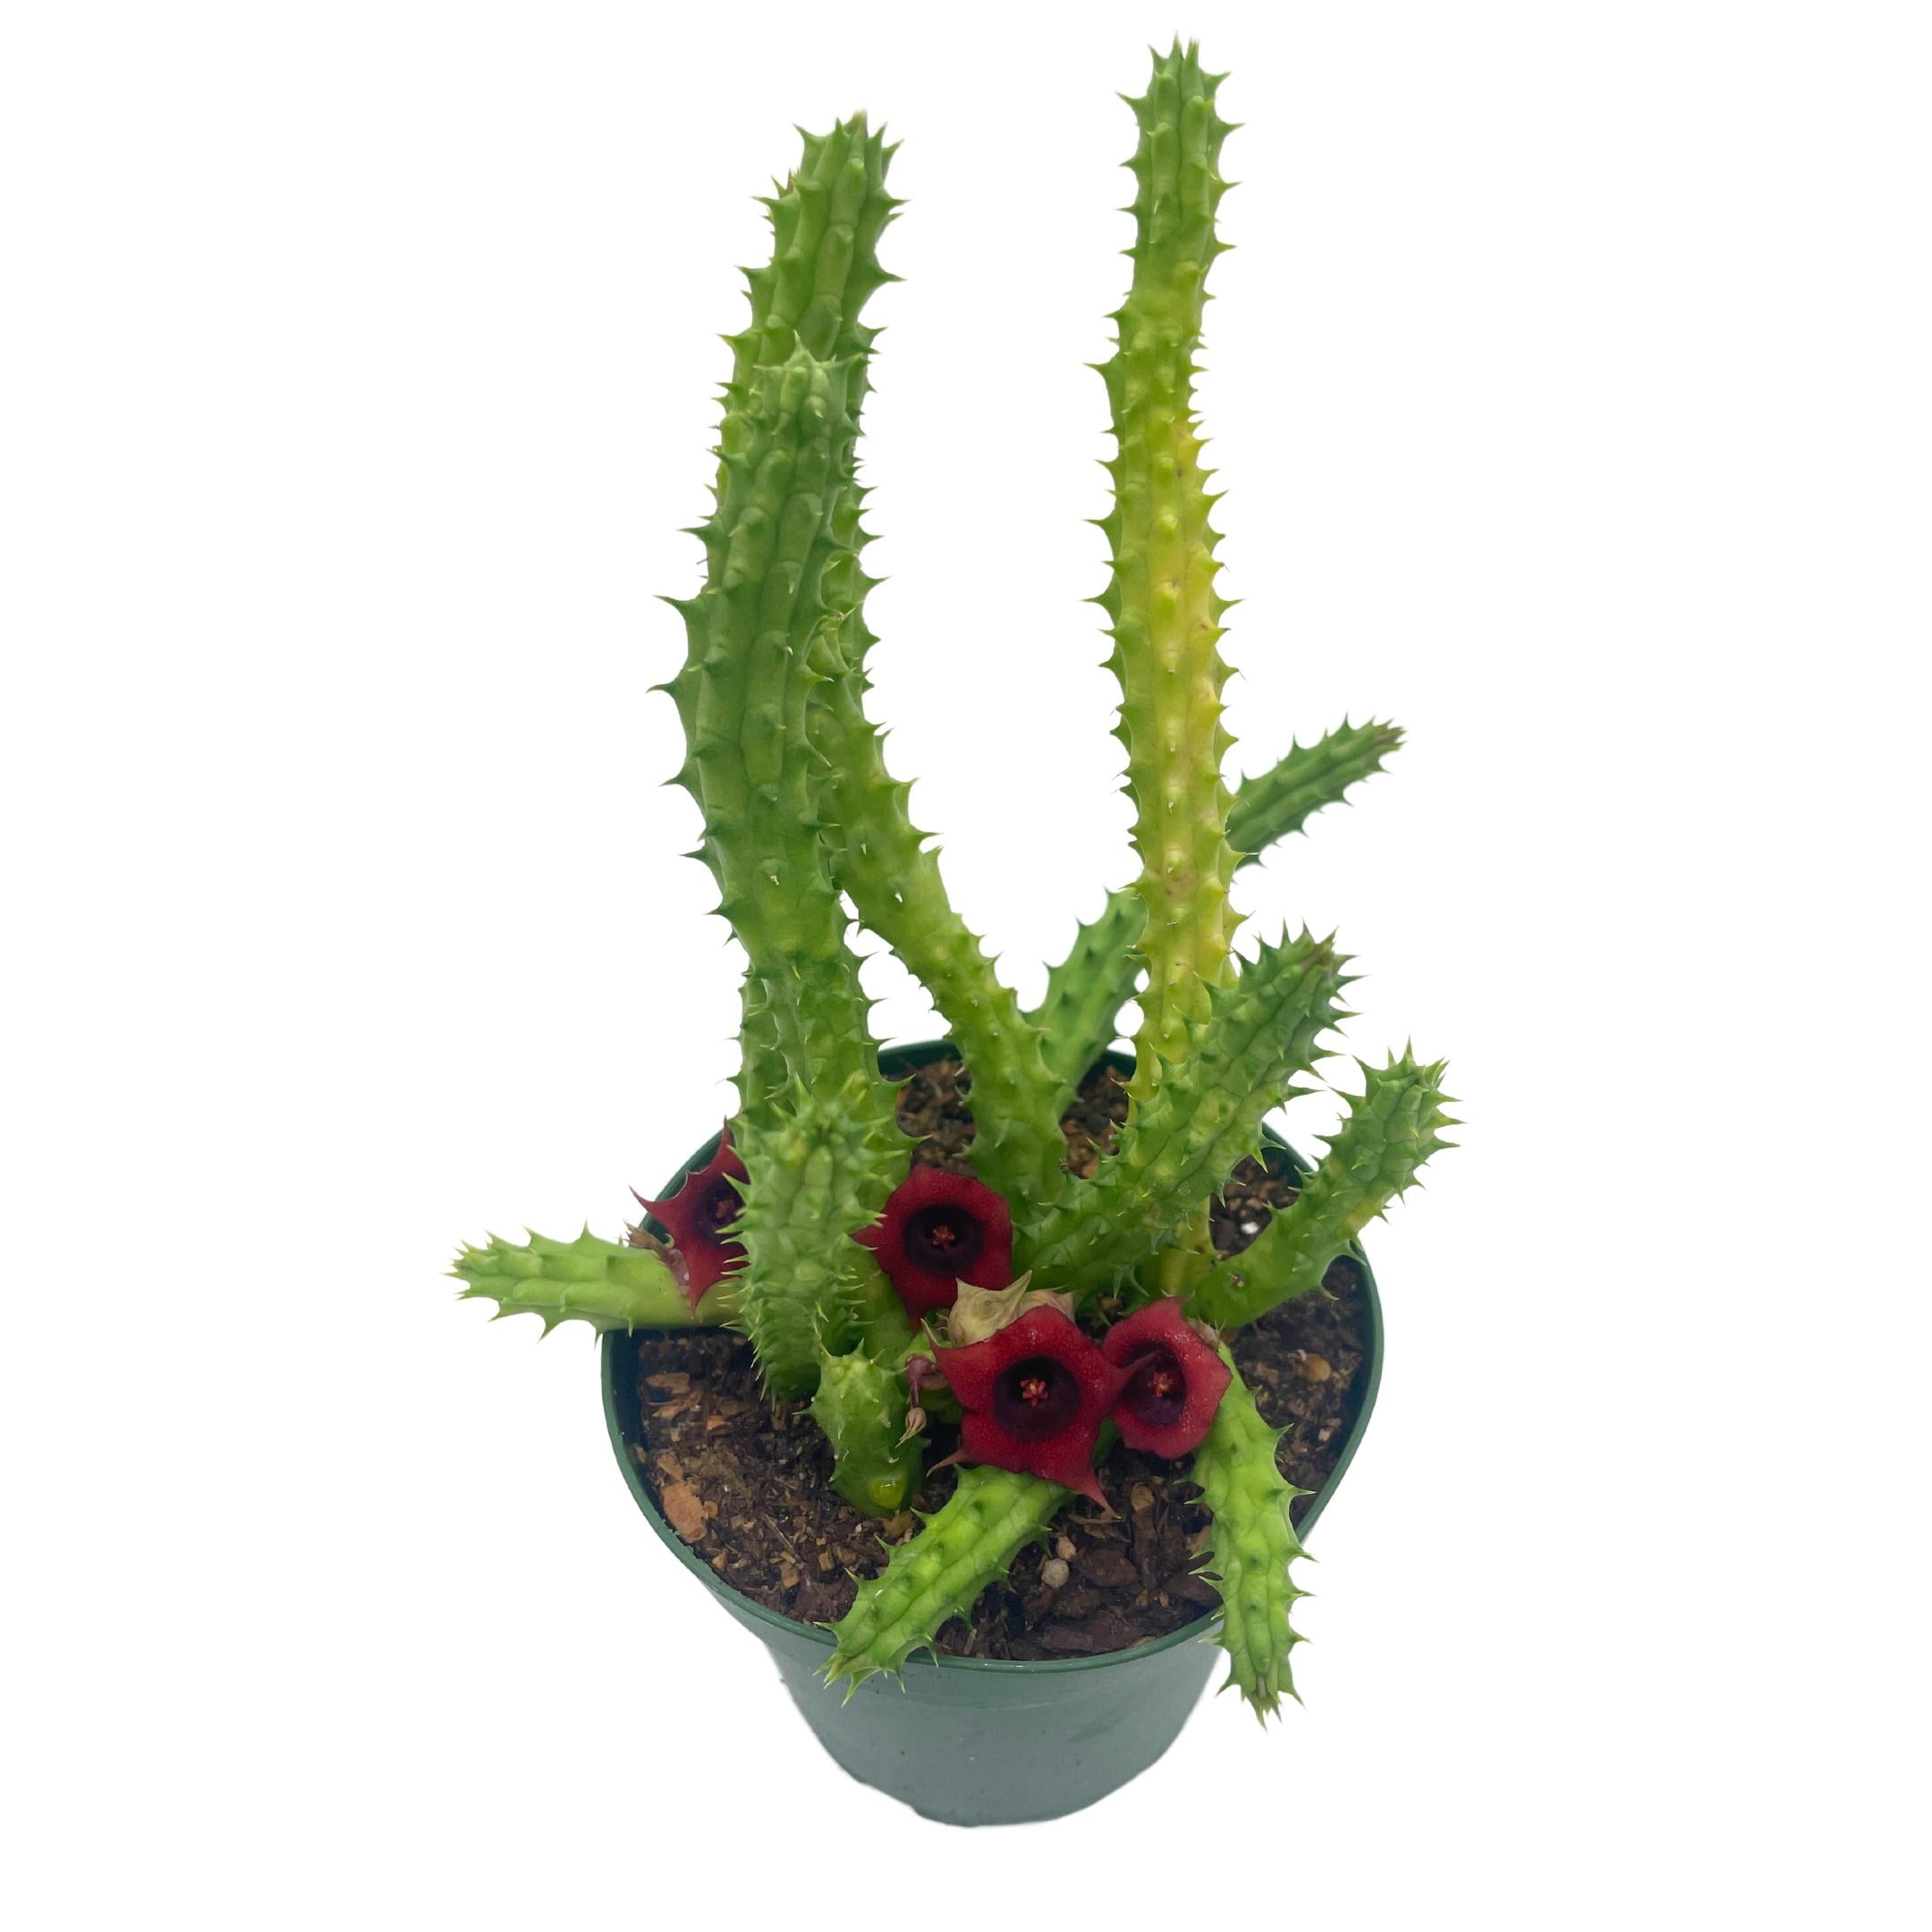 huernia "red dragon" stapelia cactus / huernia penzigii / cactus plant with  roots / beginner cactus / red dragon plant starts, 4 inch